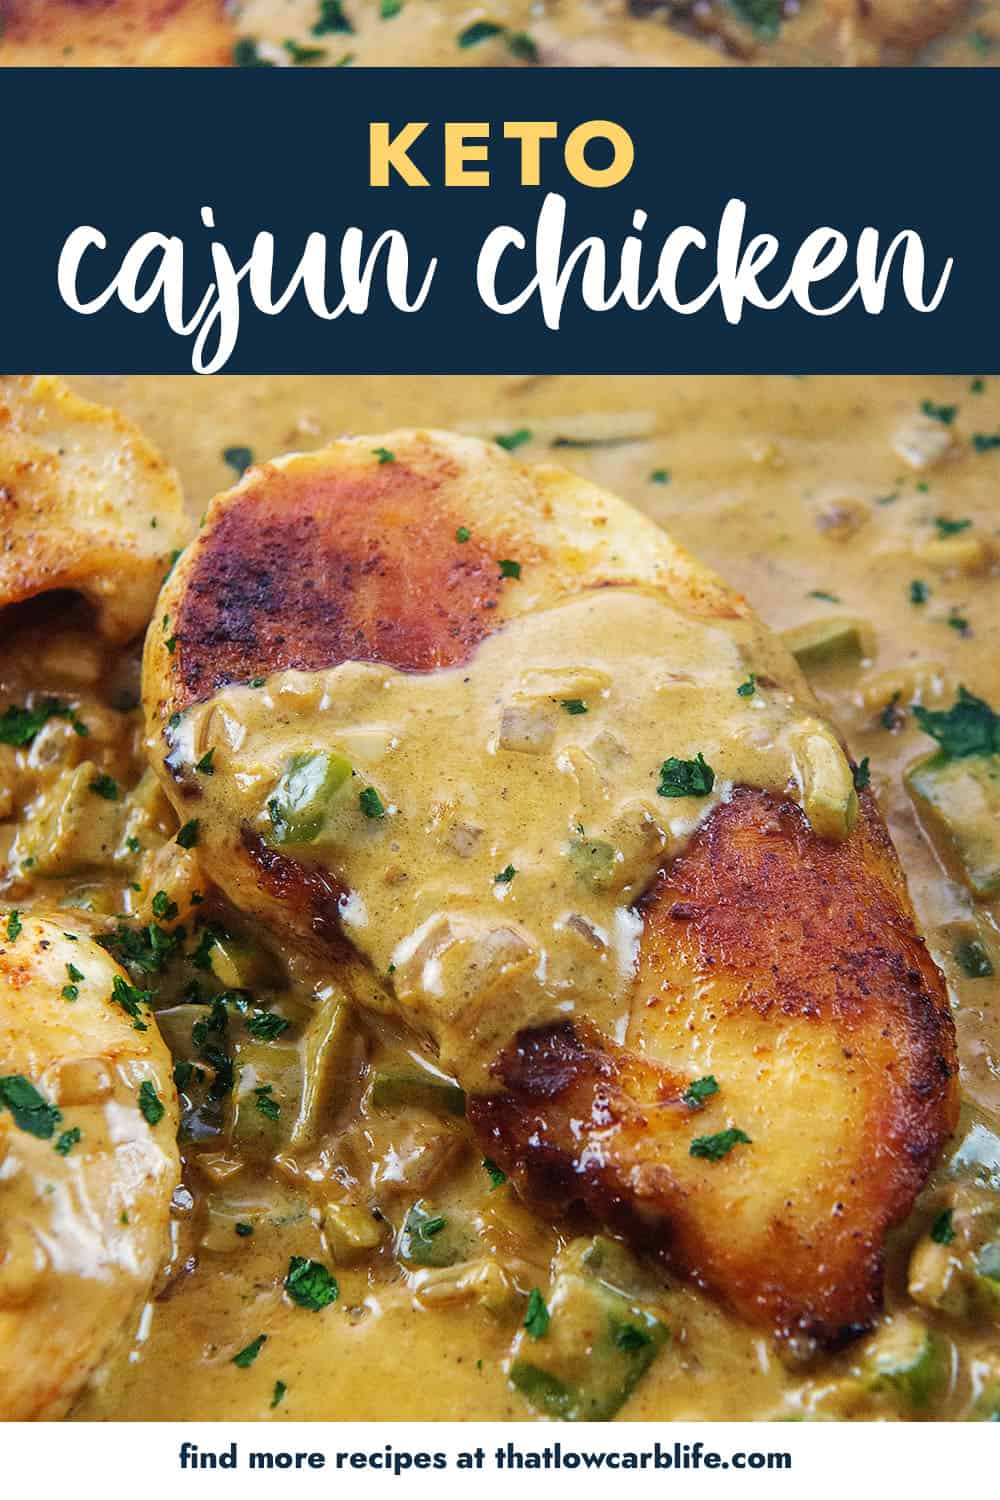 keto cajun chicken recipe with text for Pinterest.